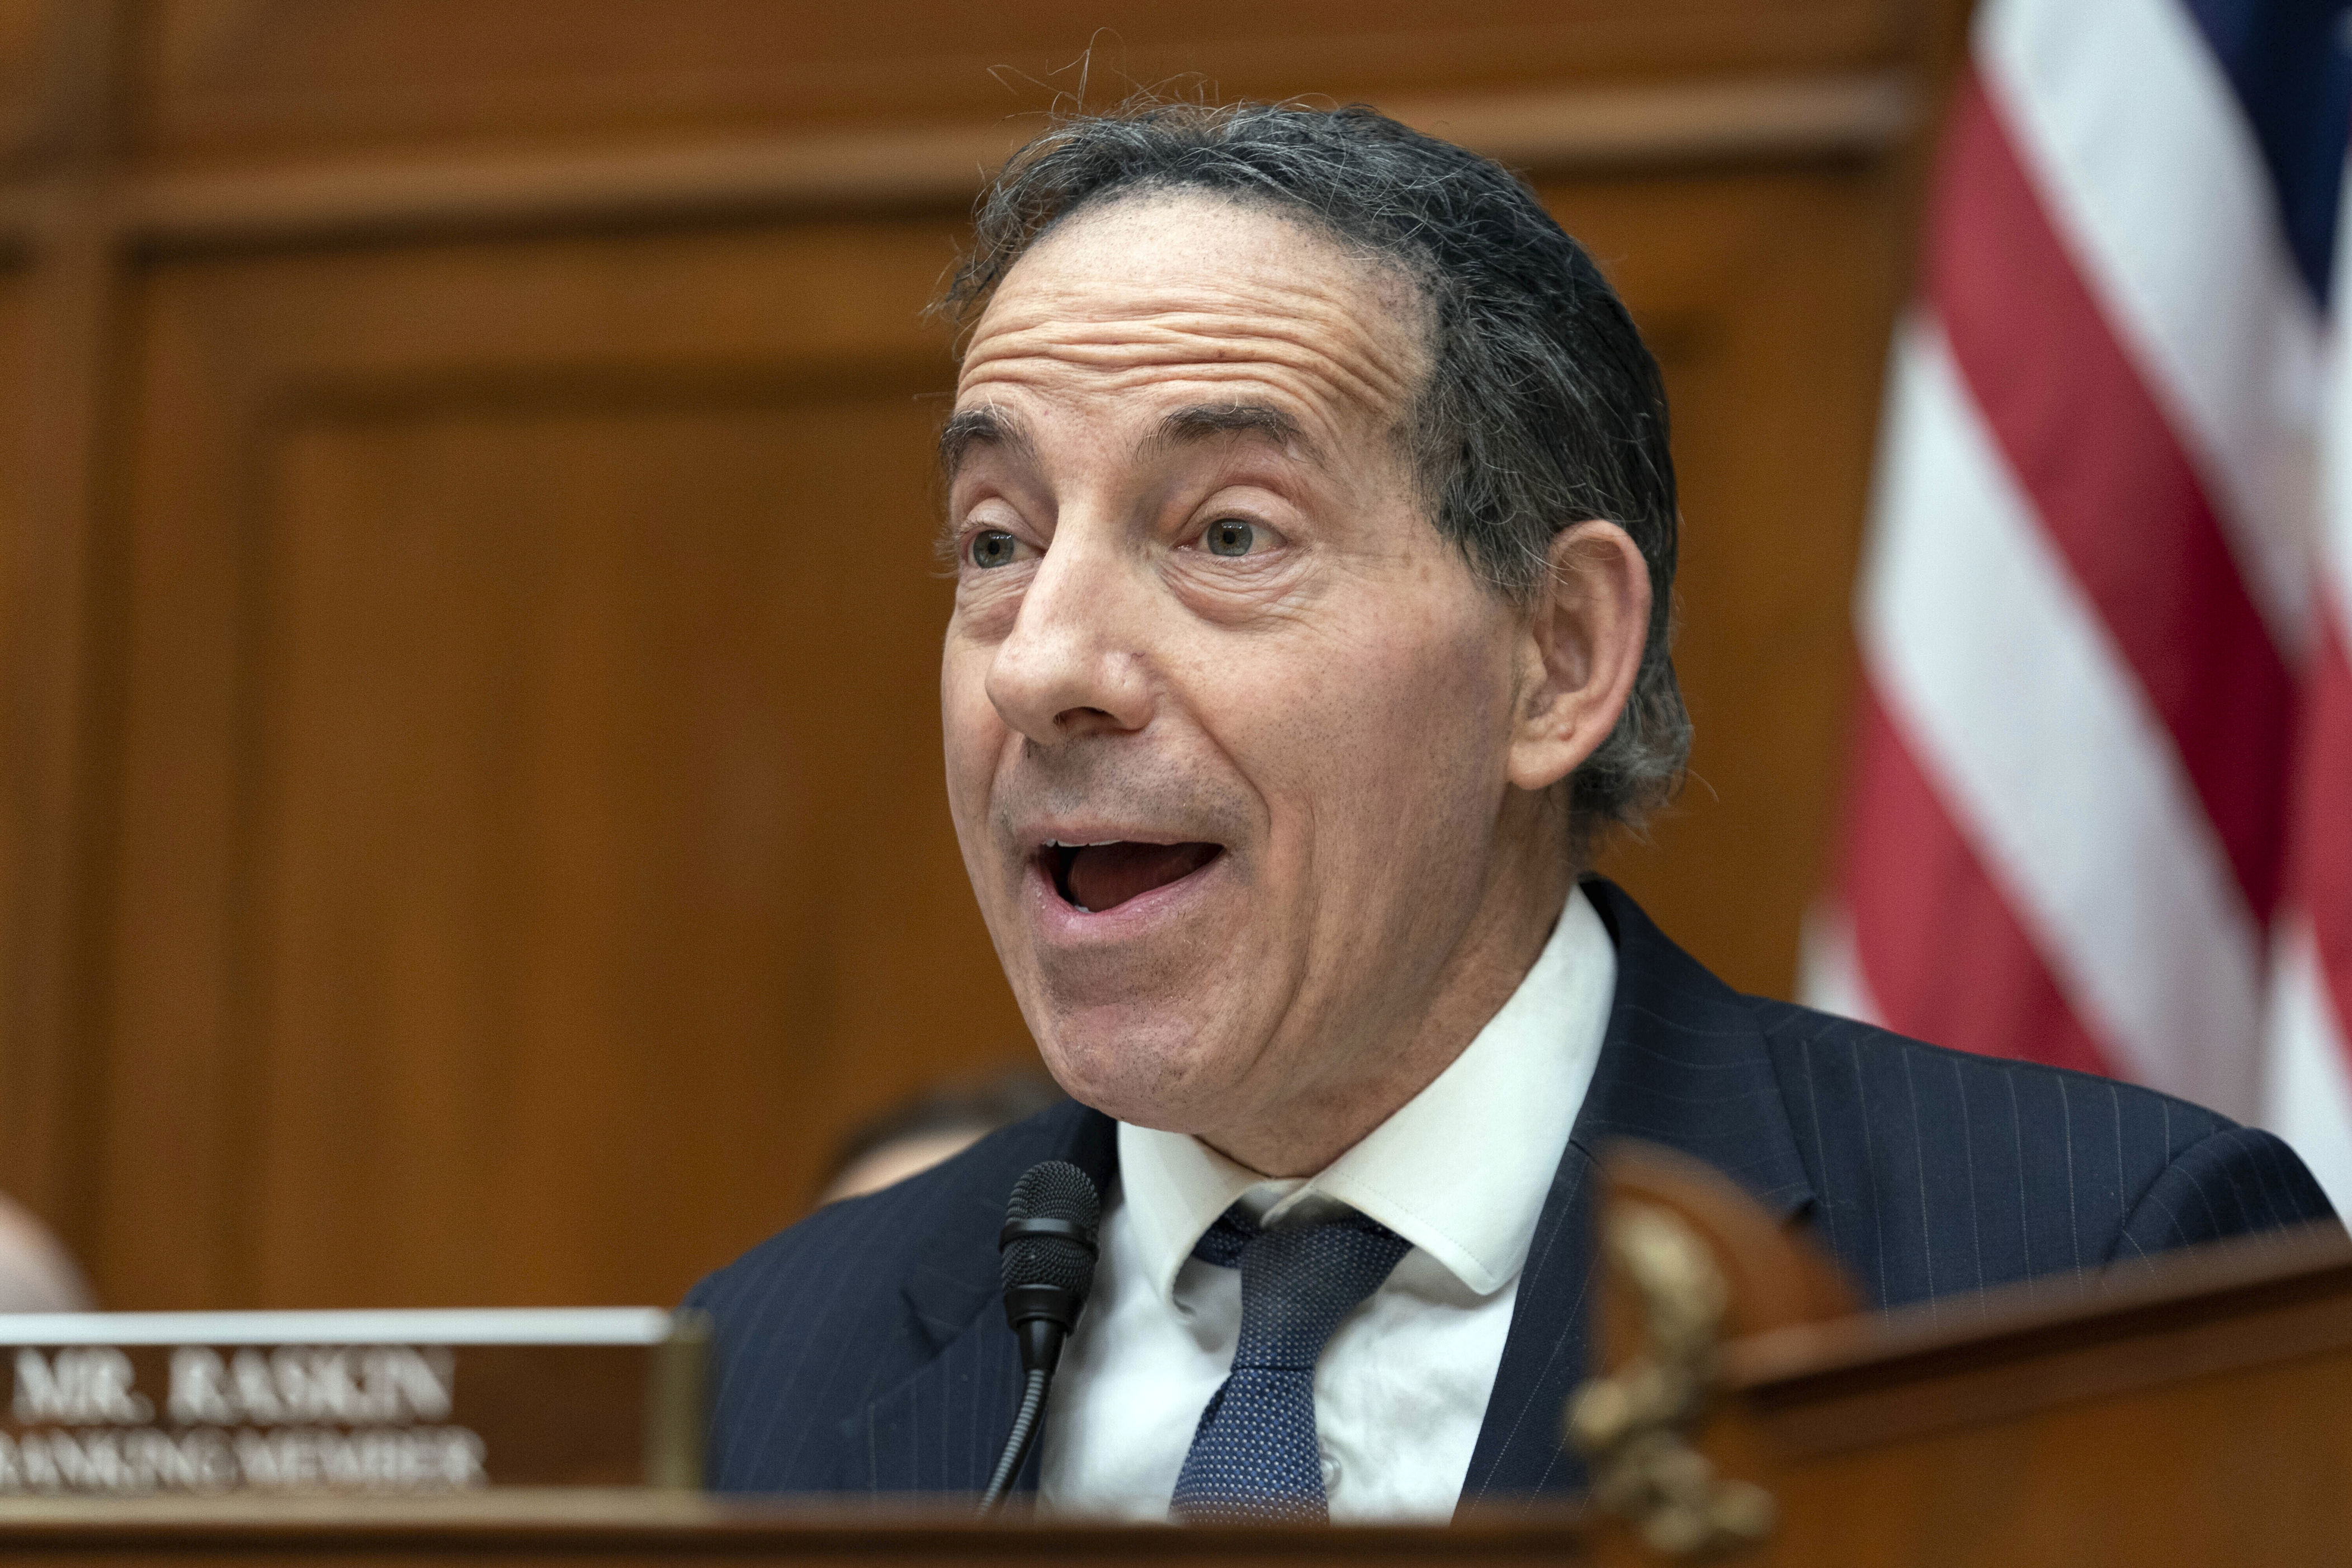 jamie raskin schools republican with brutal u.s. history lesson: i 'wrote a paper about it'